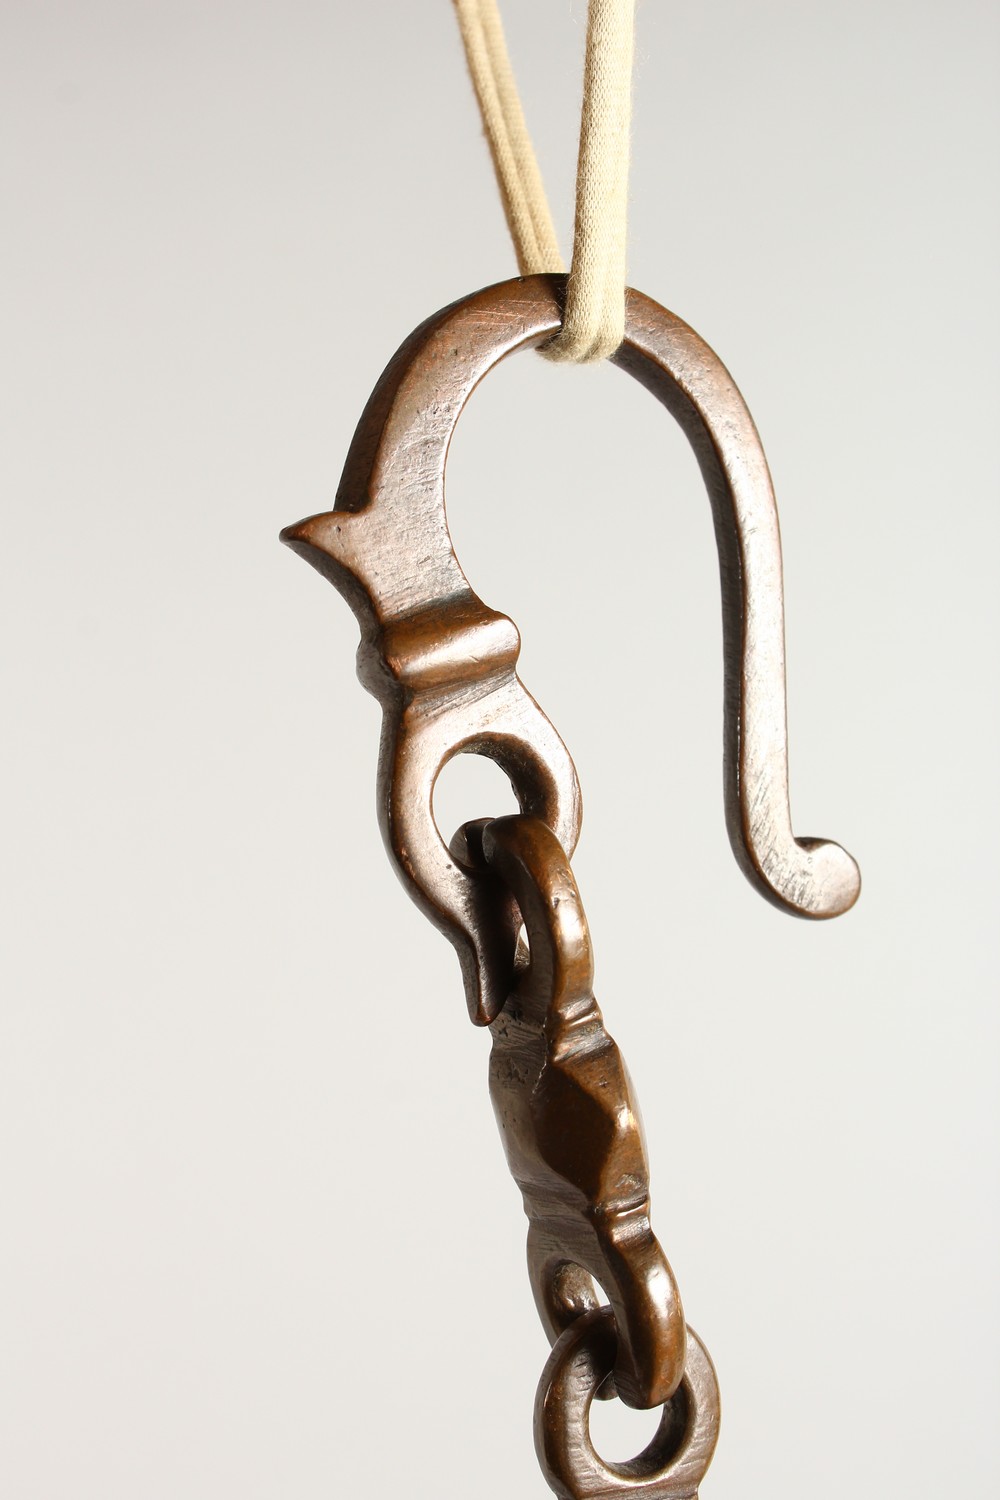 AN 18TH CENTURY JEWISH HANGING BRONZE OIL LAMP with chain. Lamp: 5.5ins high. - Image 6 of 6